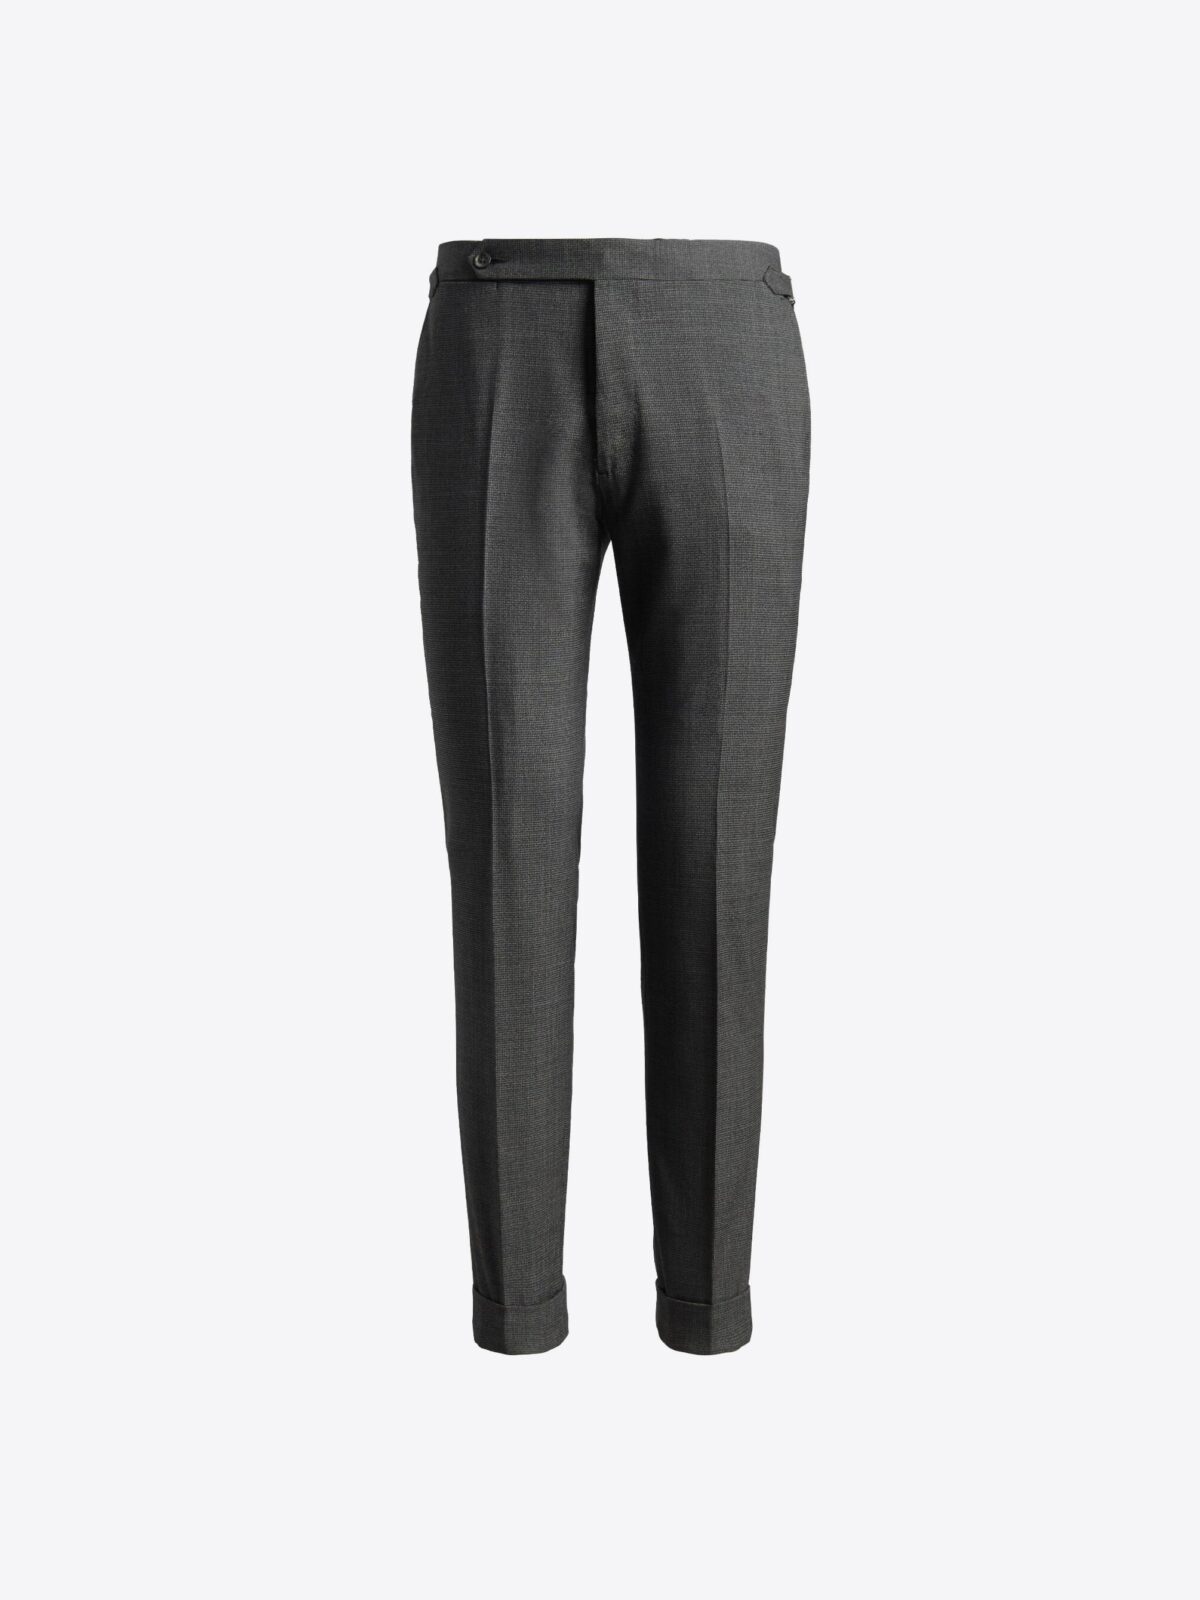 Wool Stretch Blend Slim Fit Tailored Pants